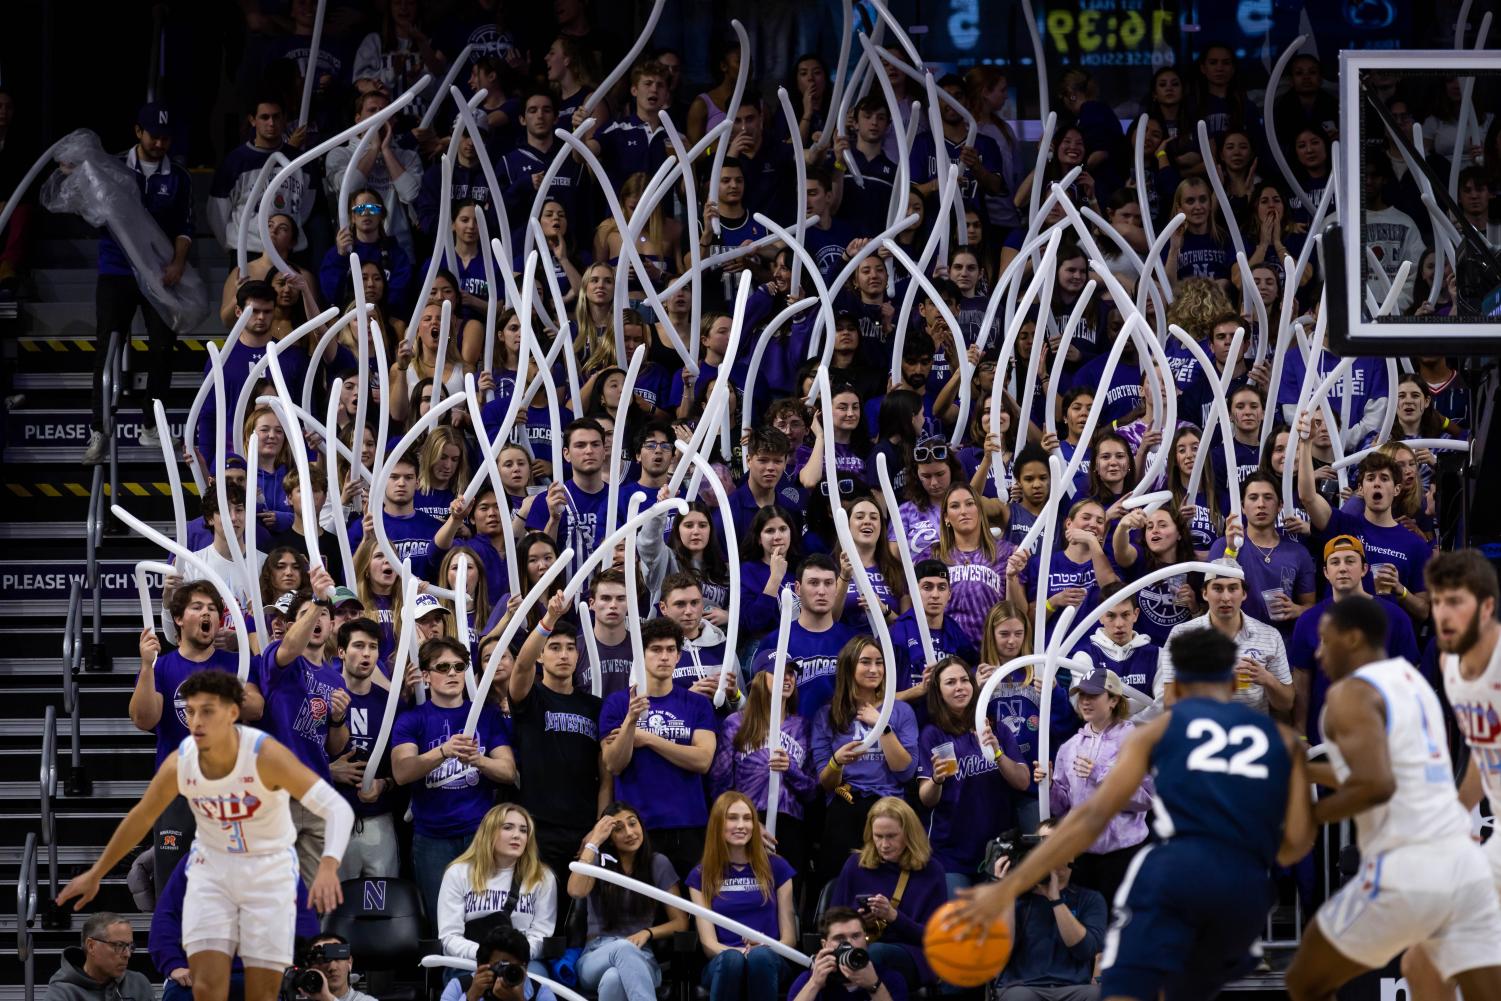 A crowd wearing purple shakes long white balloons in the air.